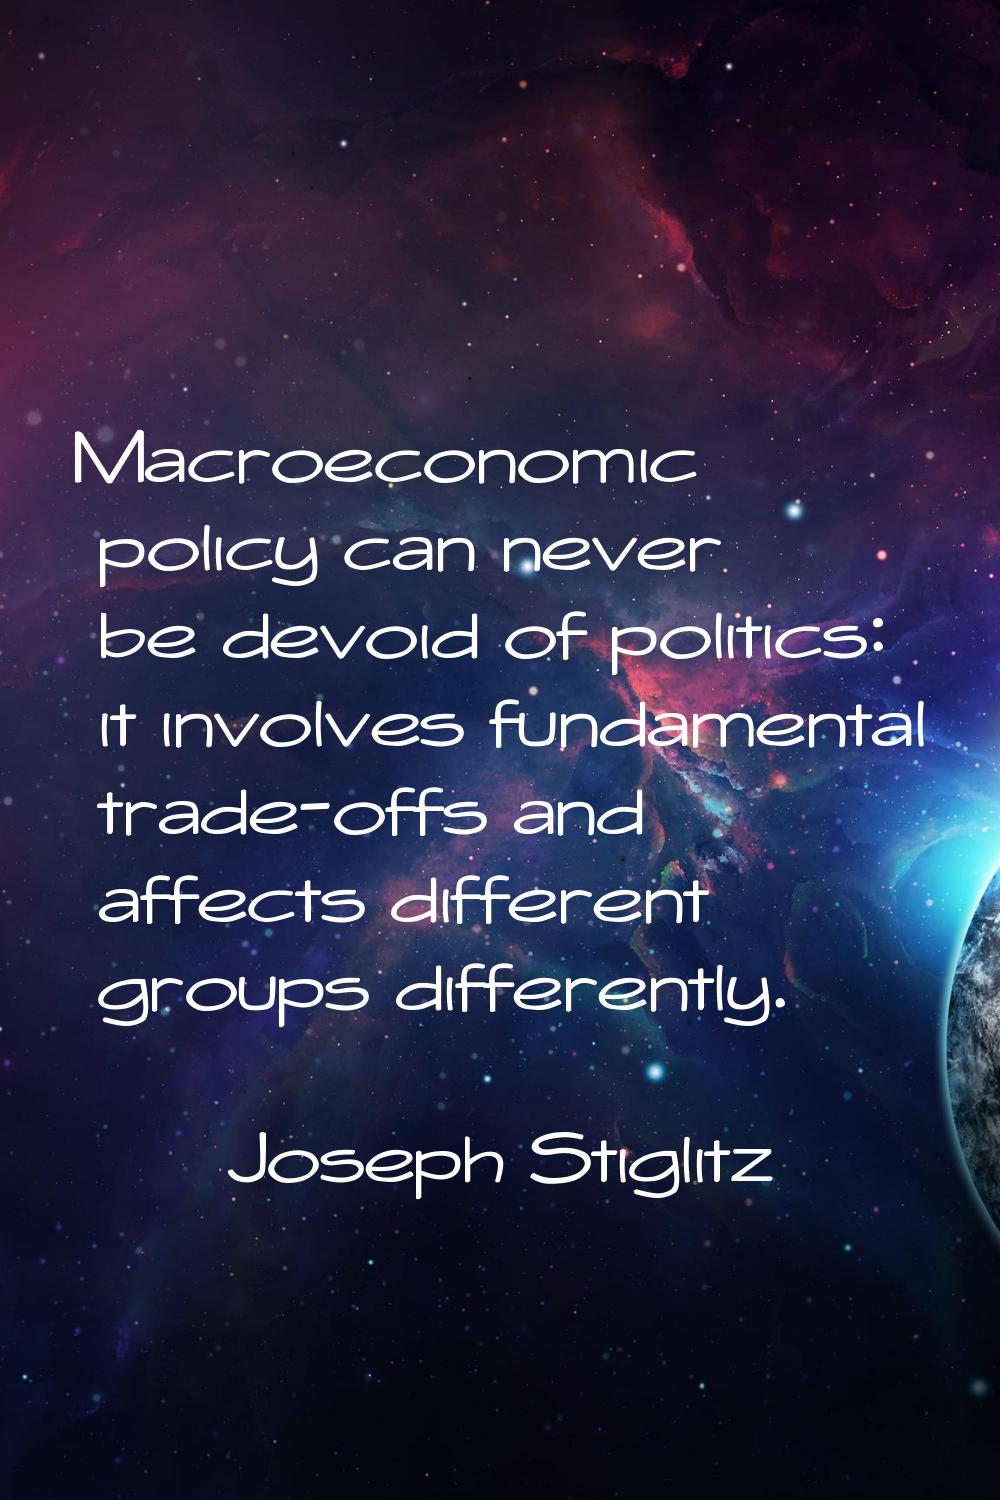 Macroeconomic policy can never be devoid of politics: it involves fundamental trade-offs and affect